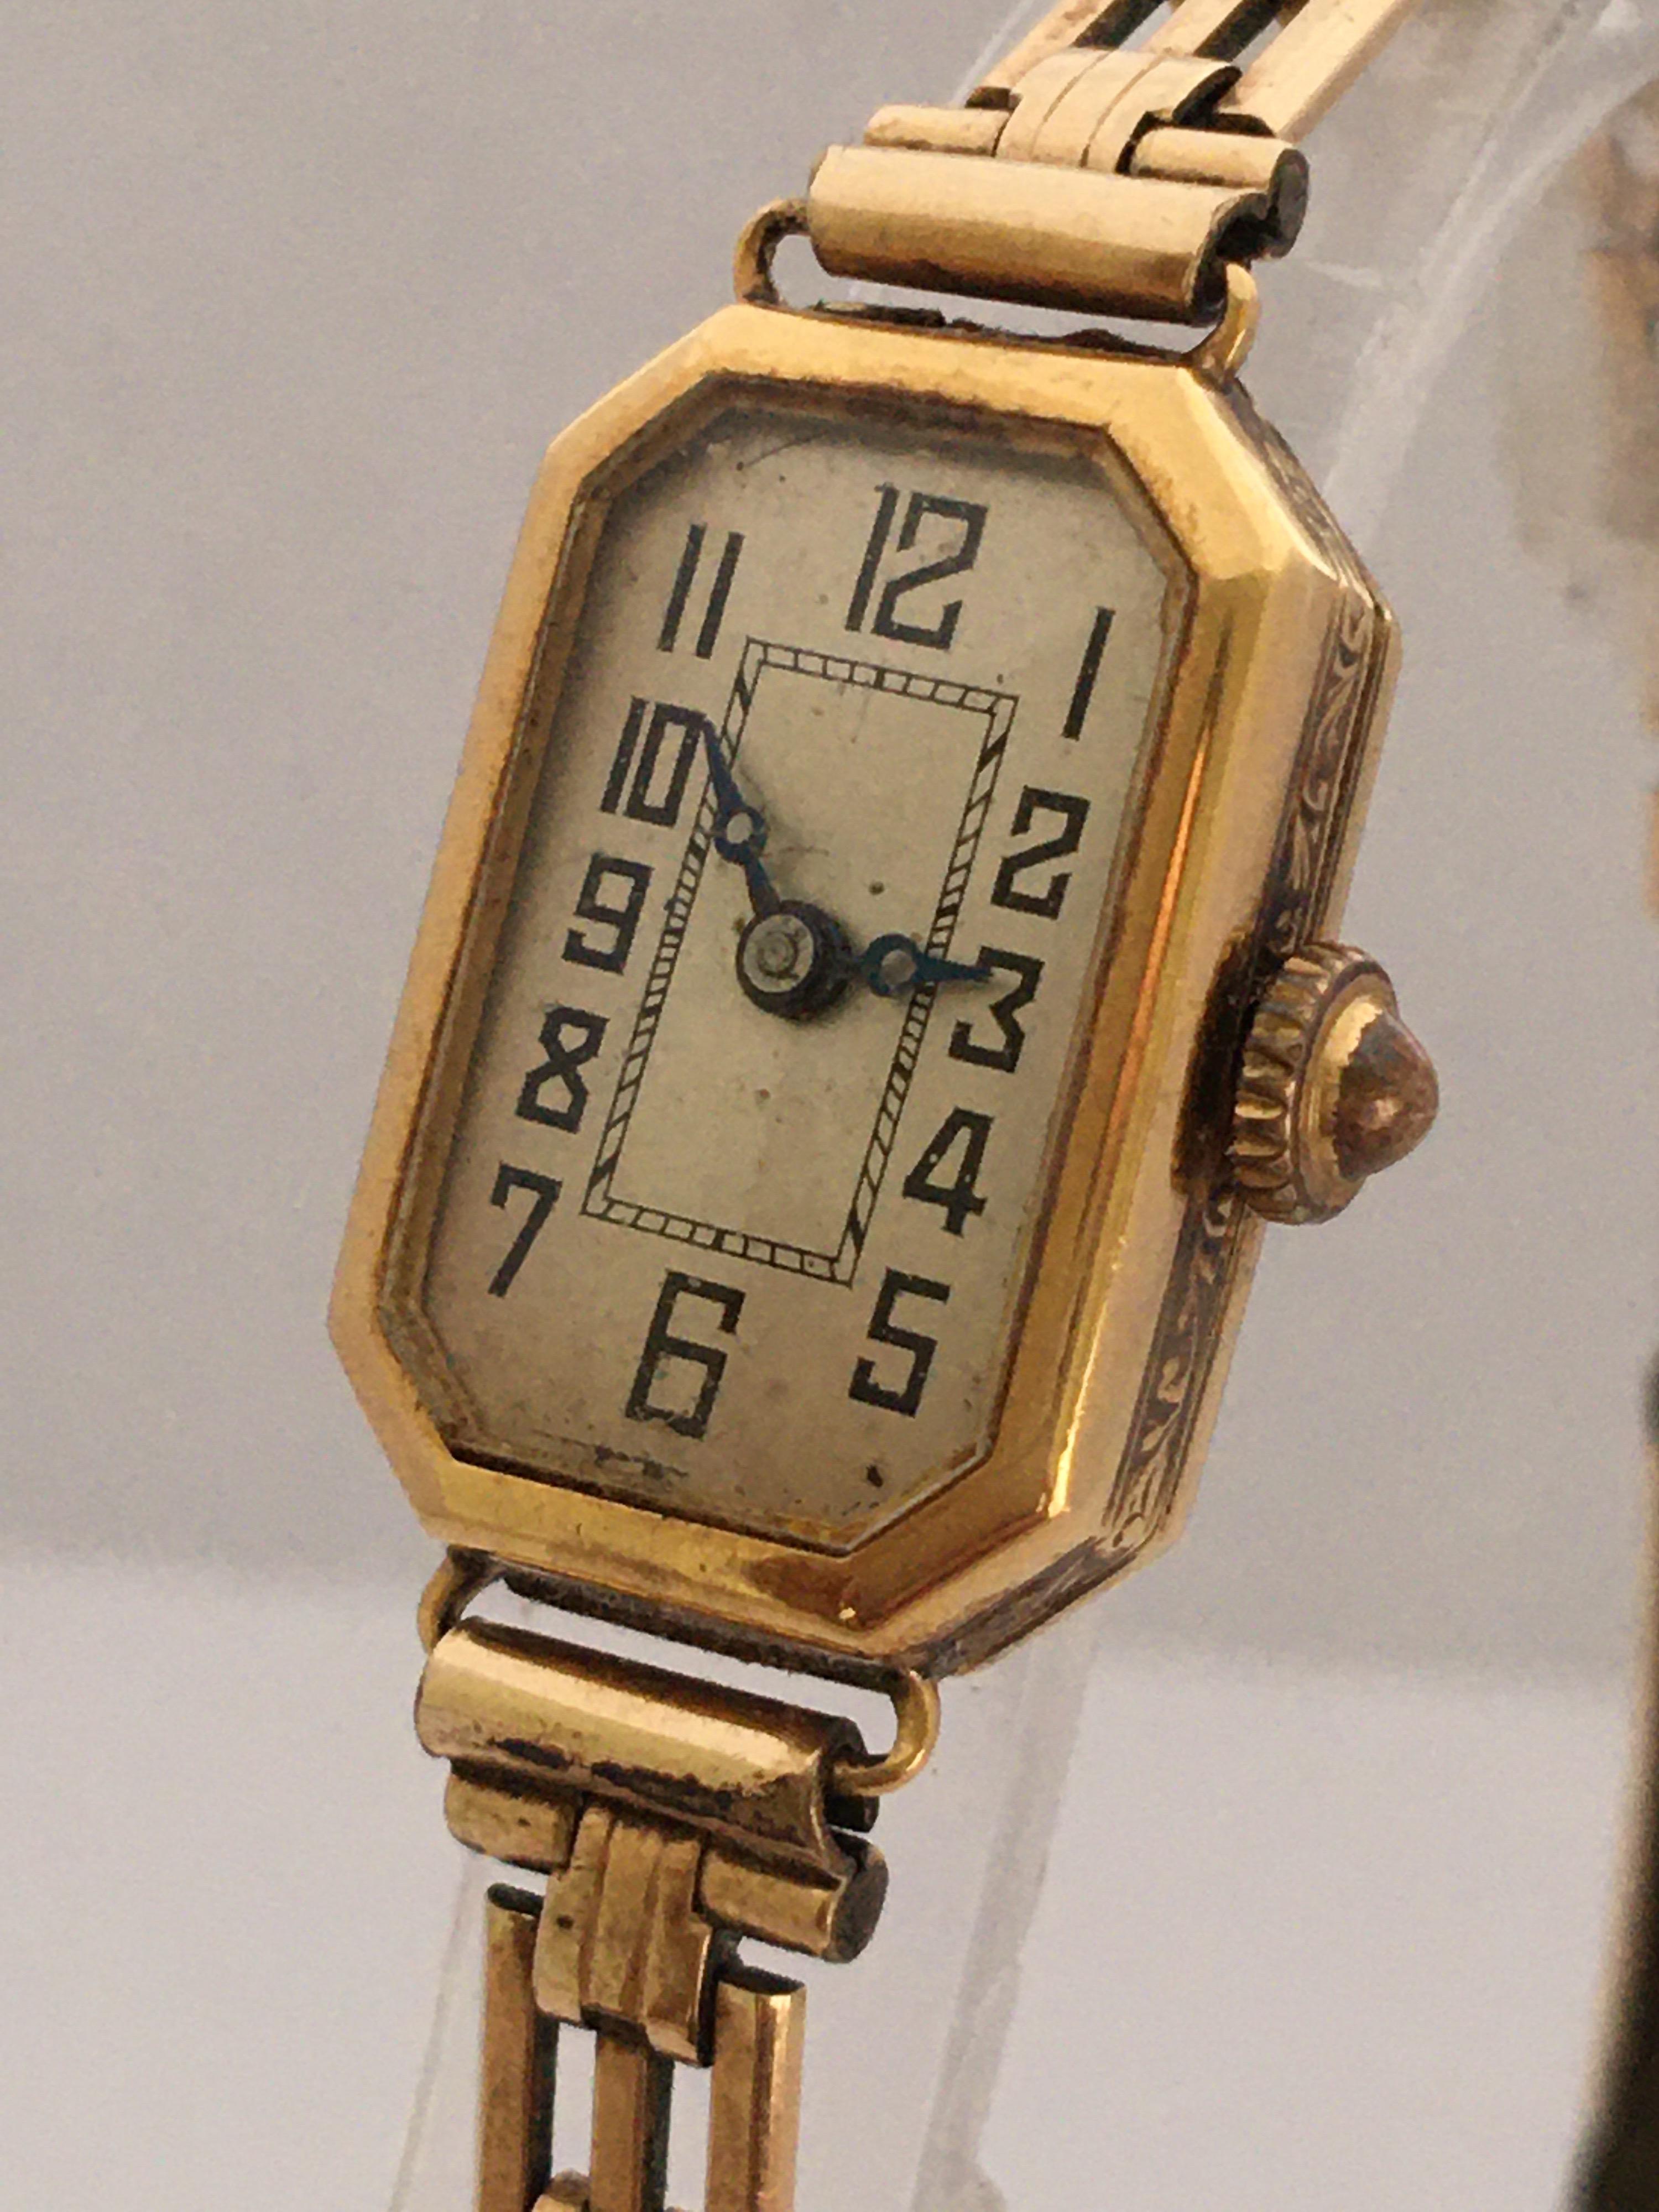 This beautiful vintage ladies hand winding gold watch is in good condition condition and it is running well. It has recently been serviced. Visible signs of ageing and wear with light and tiny scratches on the gold watch case as shown. It is 6.5